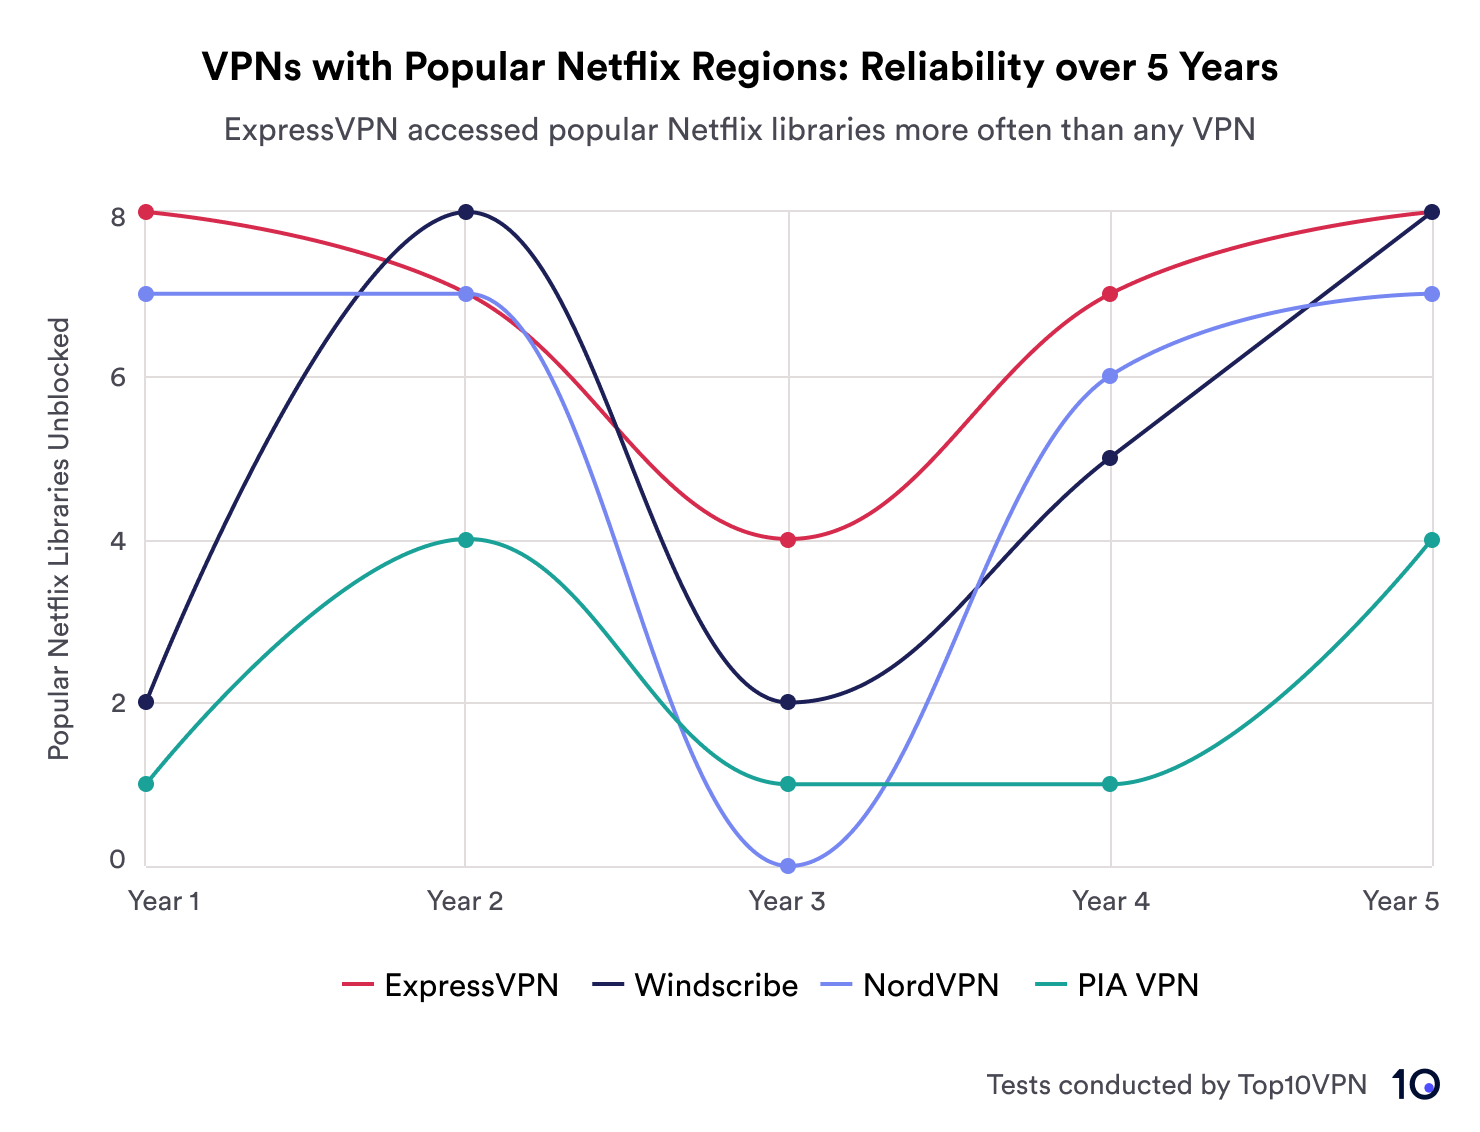 A line graph showing the performance of four VPNs—ExpressVPN, Windscribe, NordVPN, and PIA VPN—in unblocking Netflix regions over five years. ExpressVPN leads in reliability.